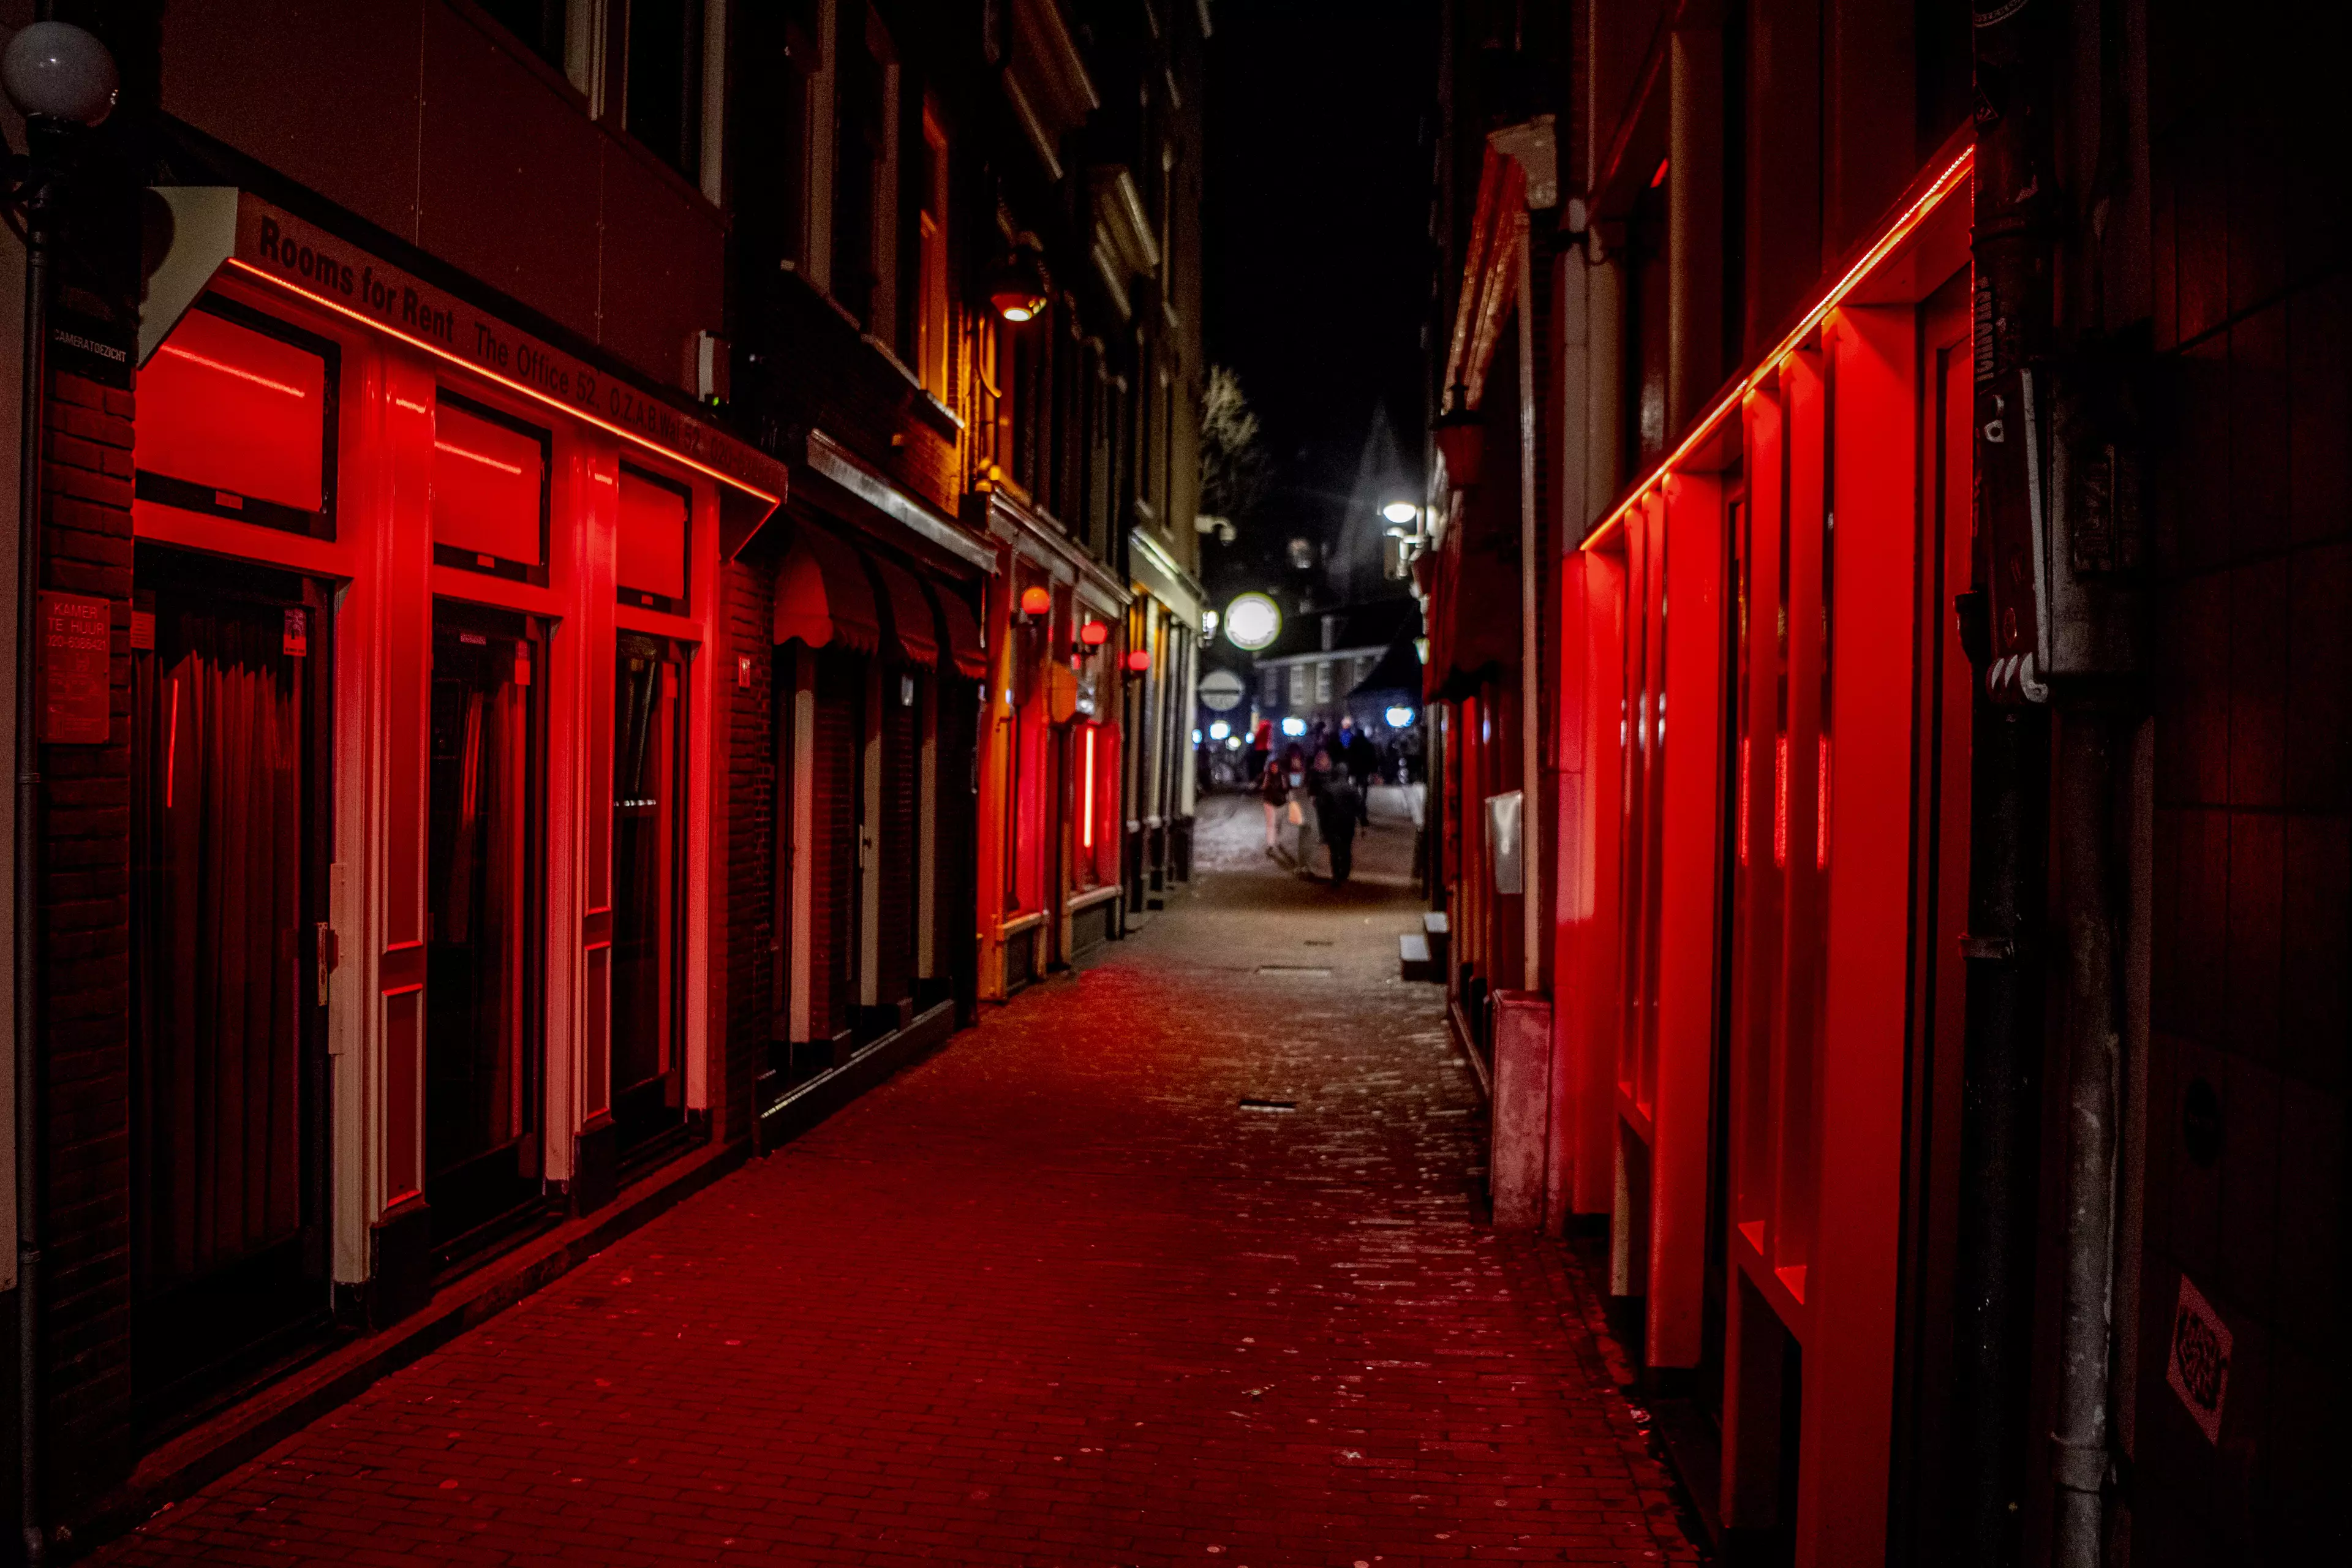 Amsterdam is known for its Red Light District.